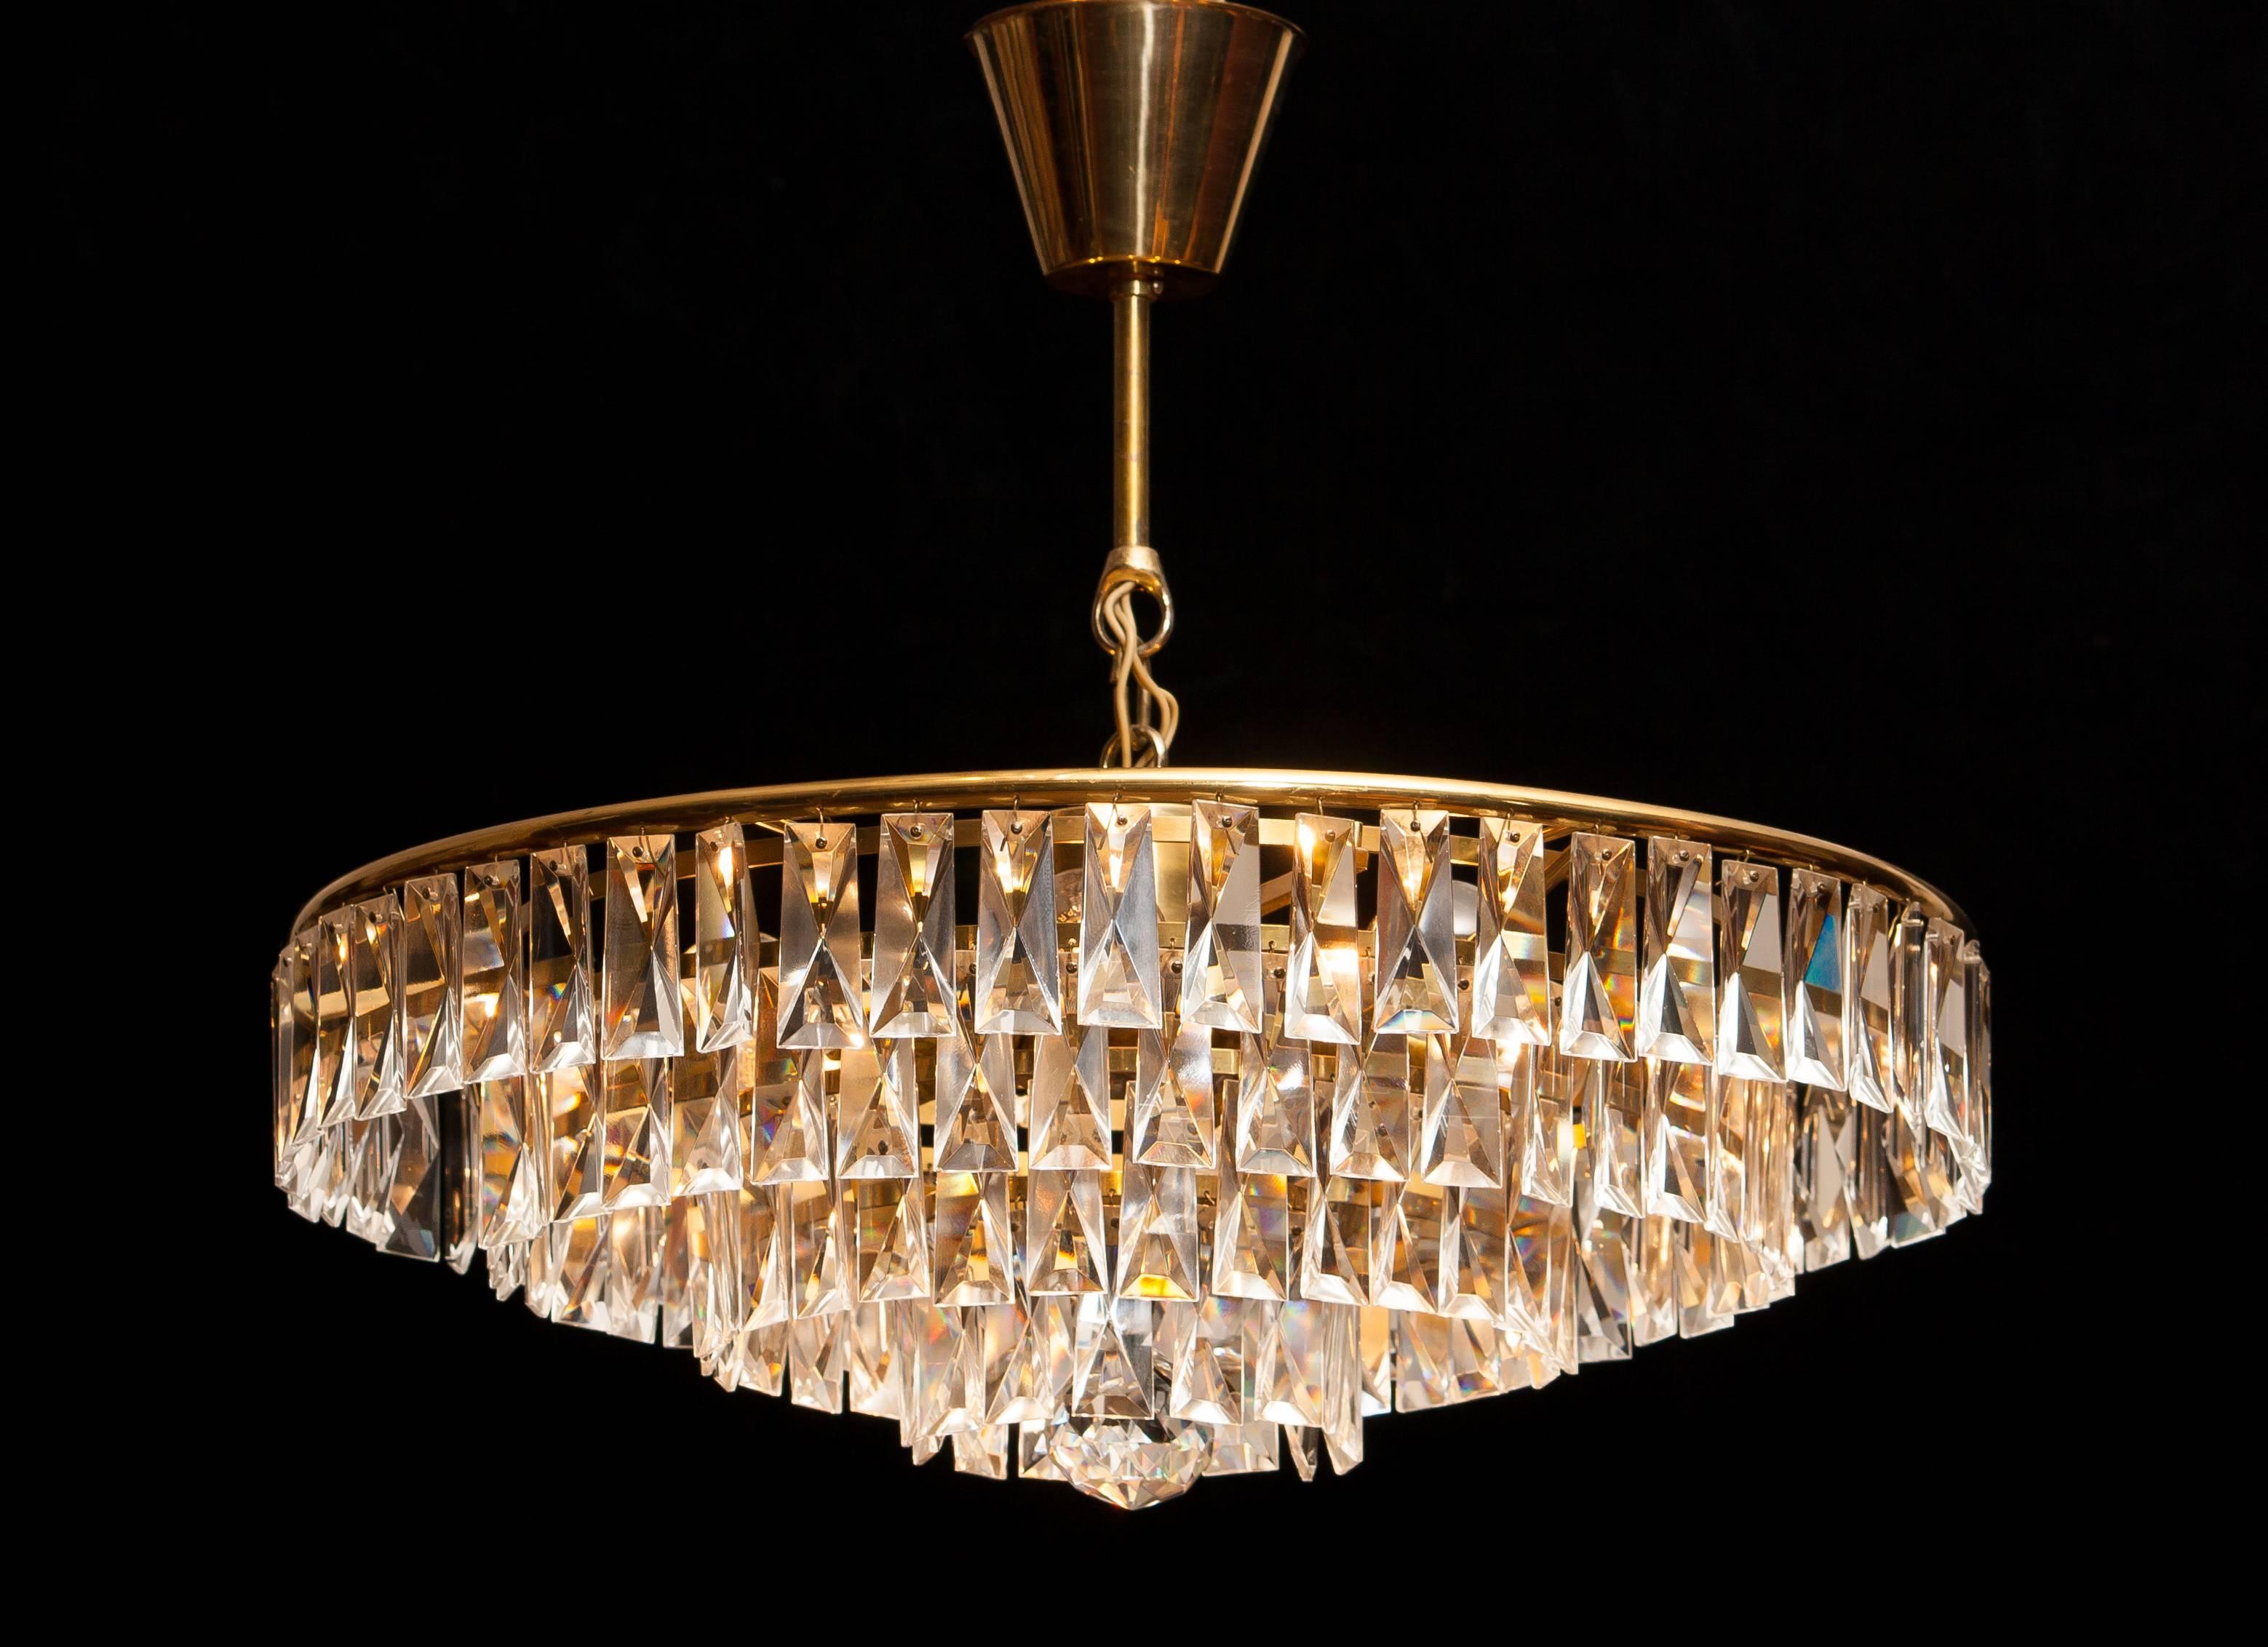 Amazing chandelier, ceiling lamp.
This lamp is made of a brass frame with beautiful crystal elements which gives a stunning light shining.
It is in a wonderful condition.
Period 1950s.
Dimensions: H 30 cm, ø 50 cm.